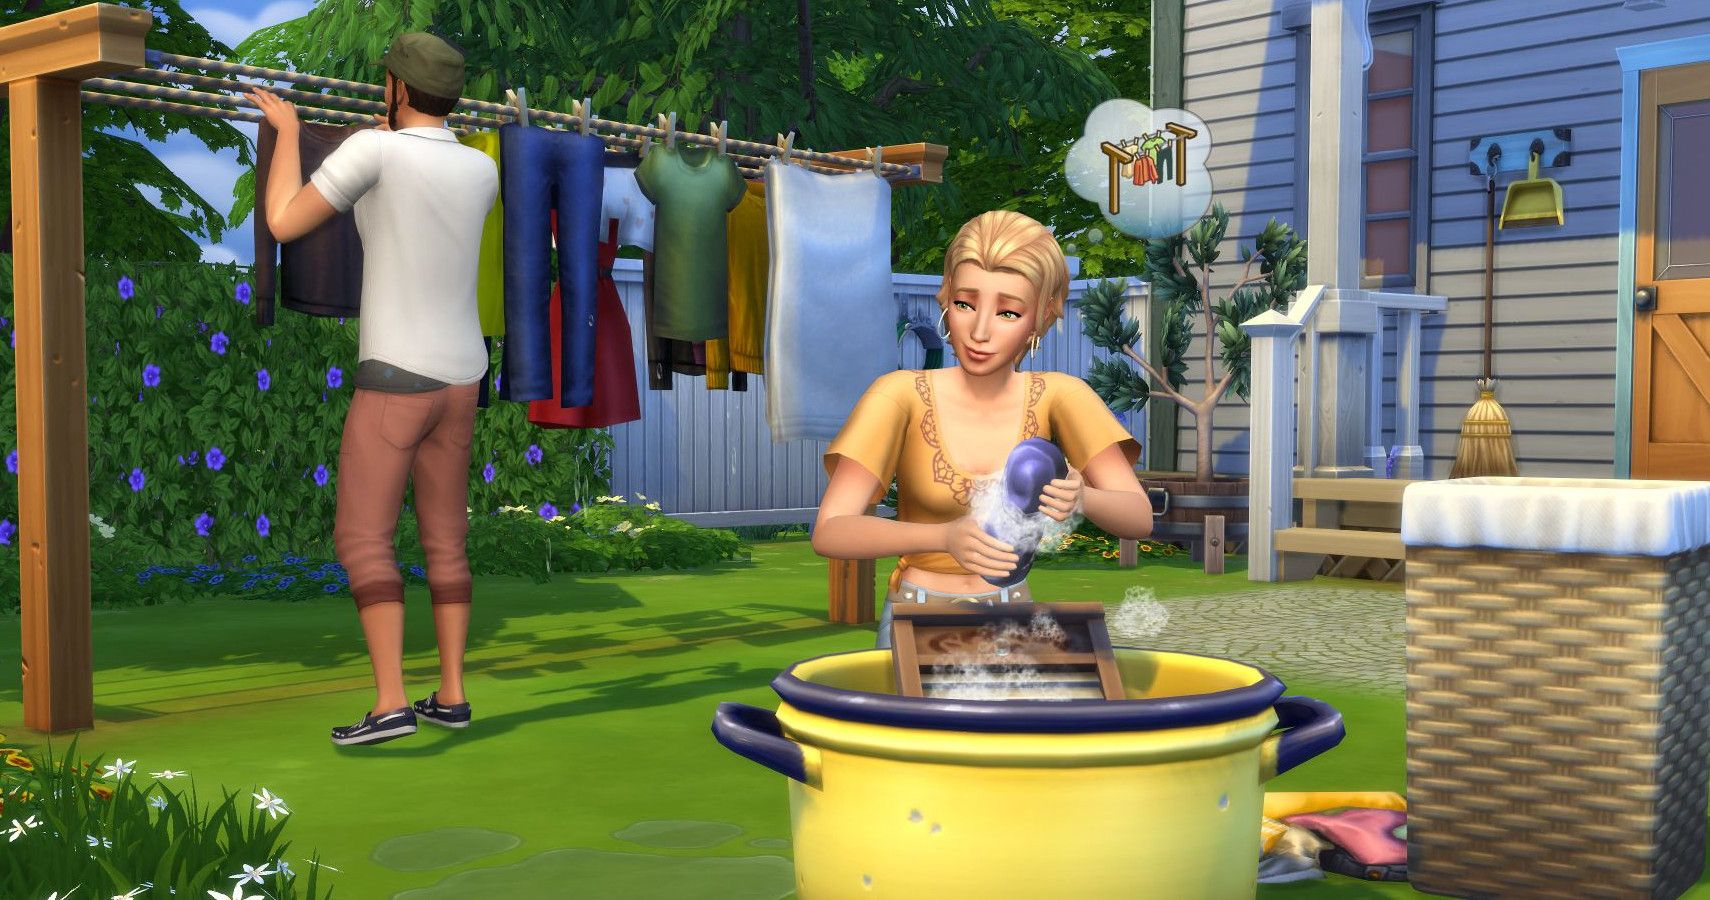 Two sims doing laundry outside with a tub and line.